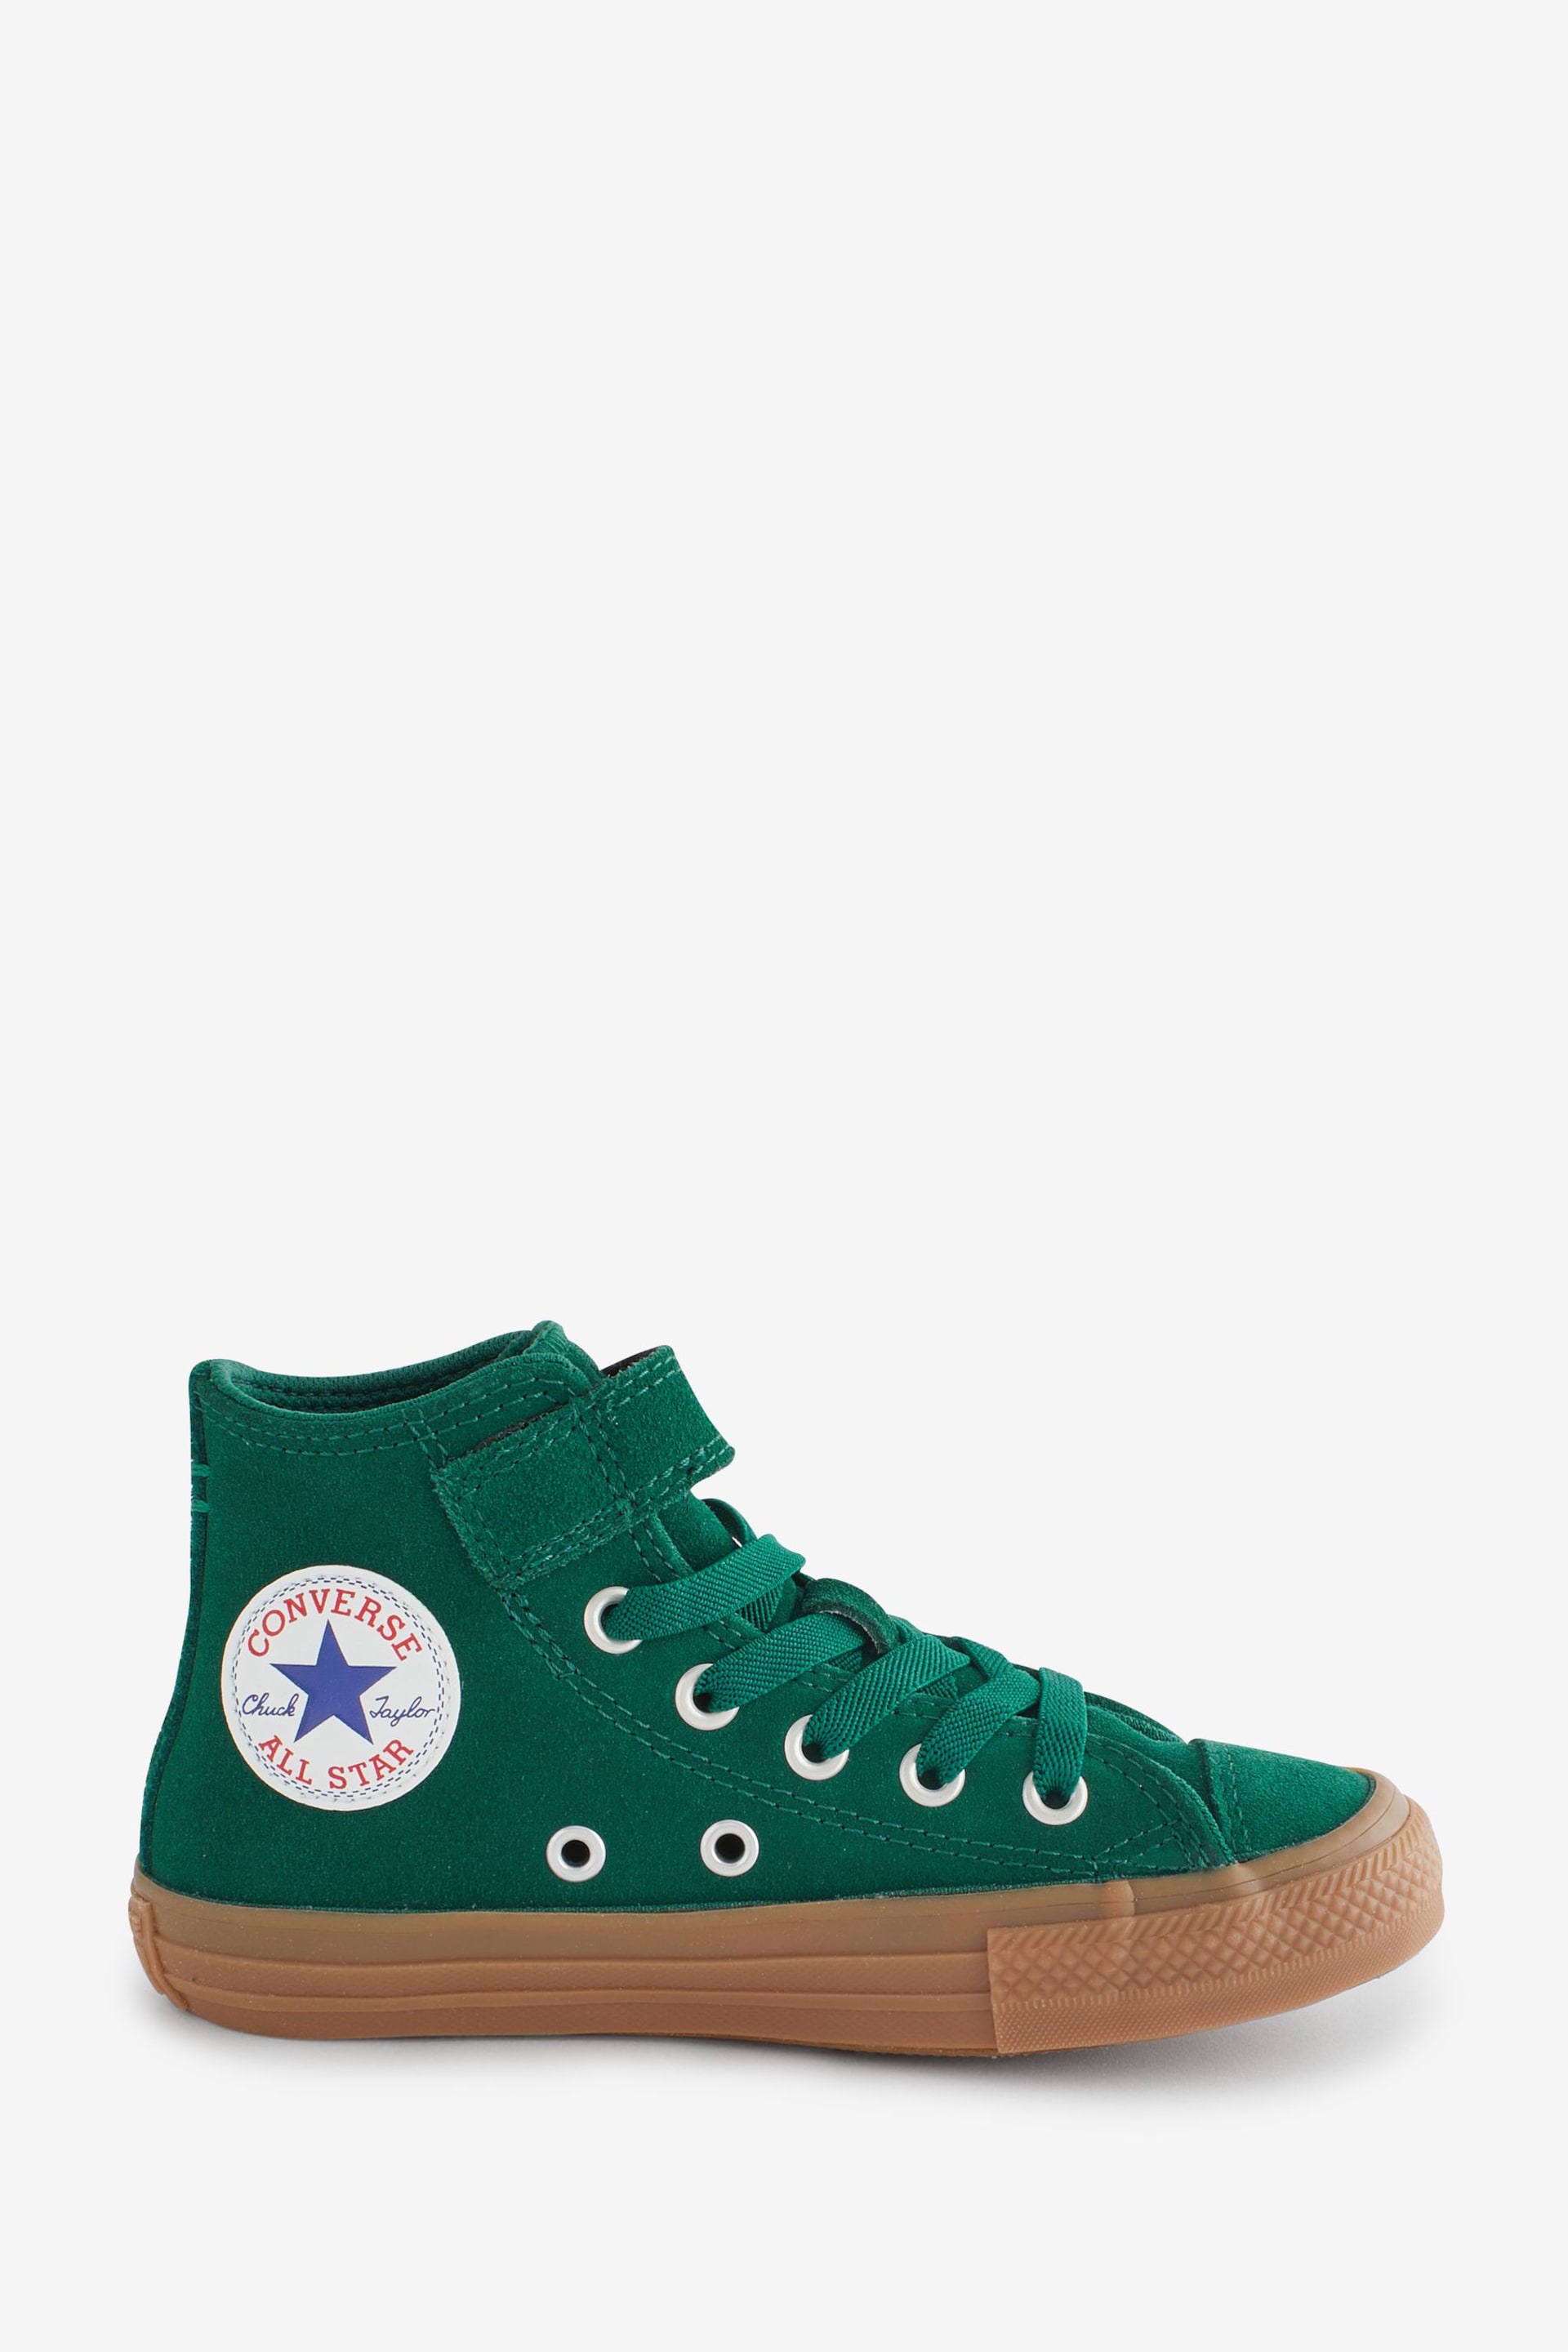 Converse Green Chuck Taylor All Star 1V Junior Trainers - Image 1 of 9